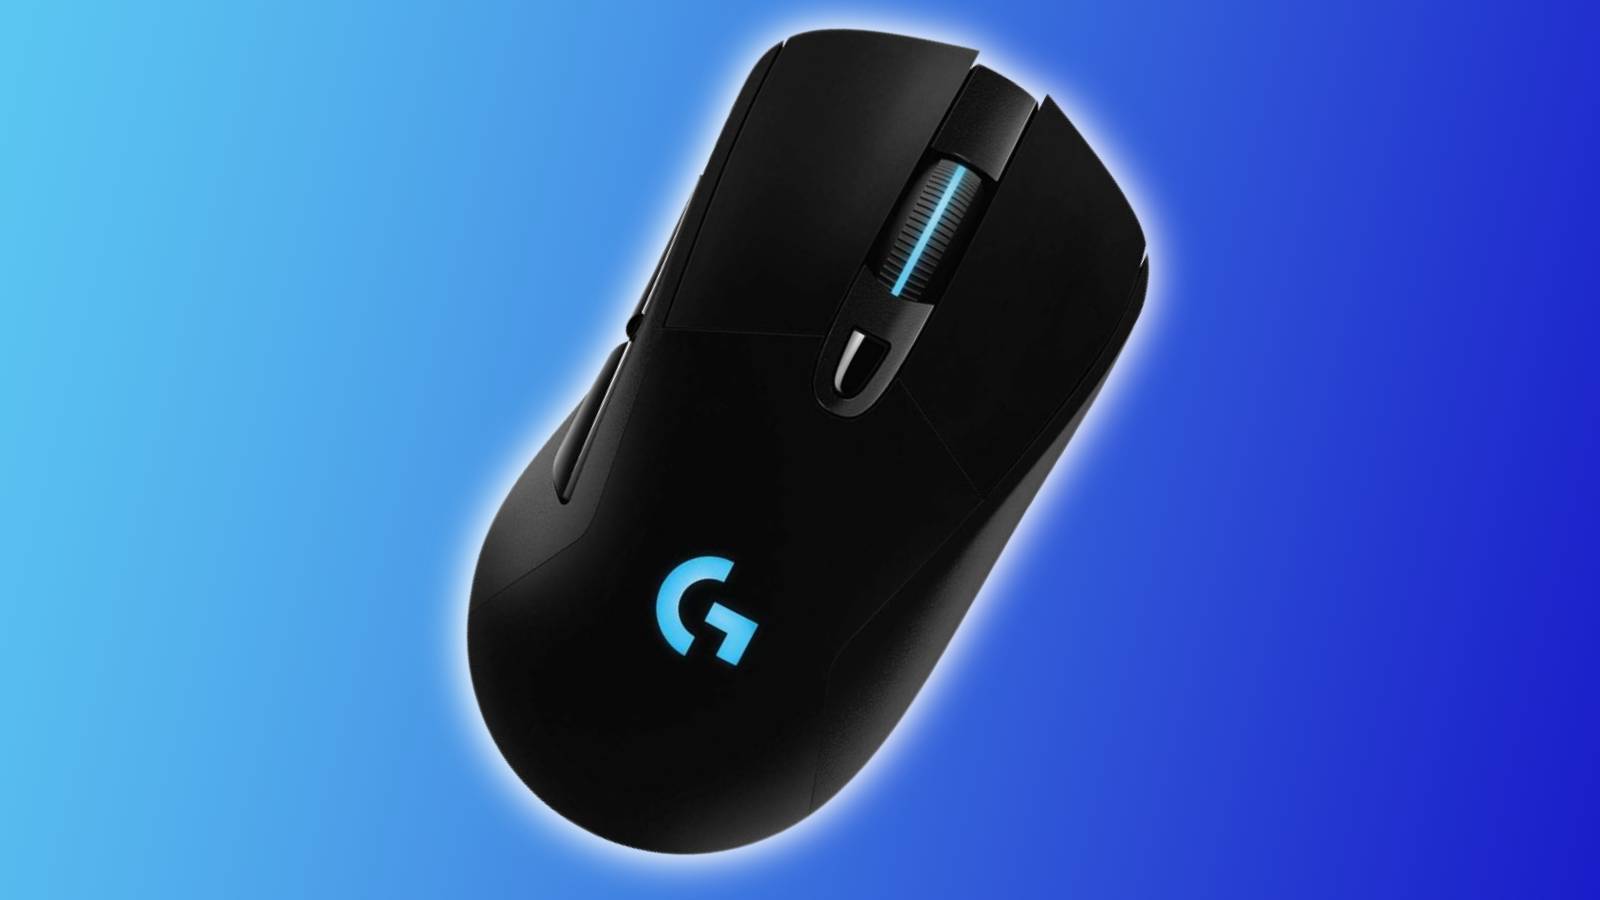 Image of the Logitech G703 Lightspeed wireless gaming mouse on a blue background.